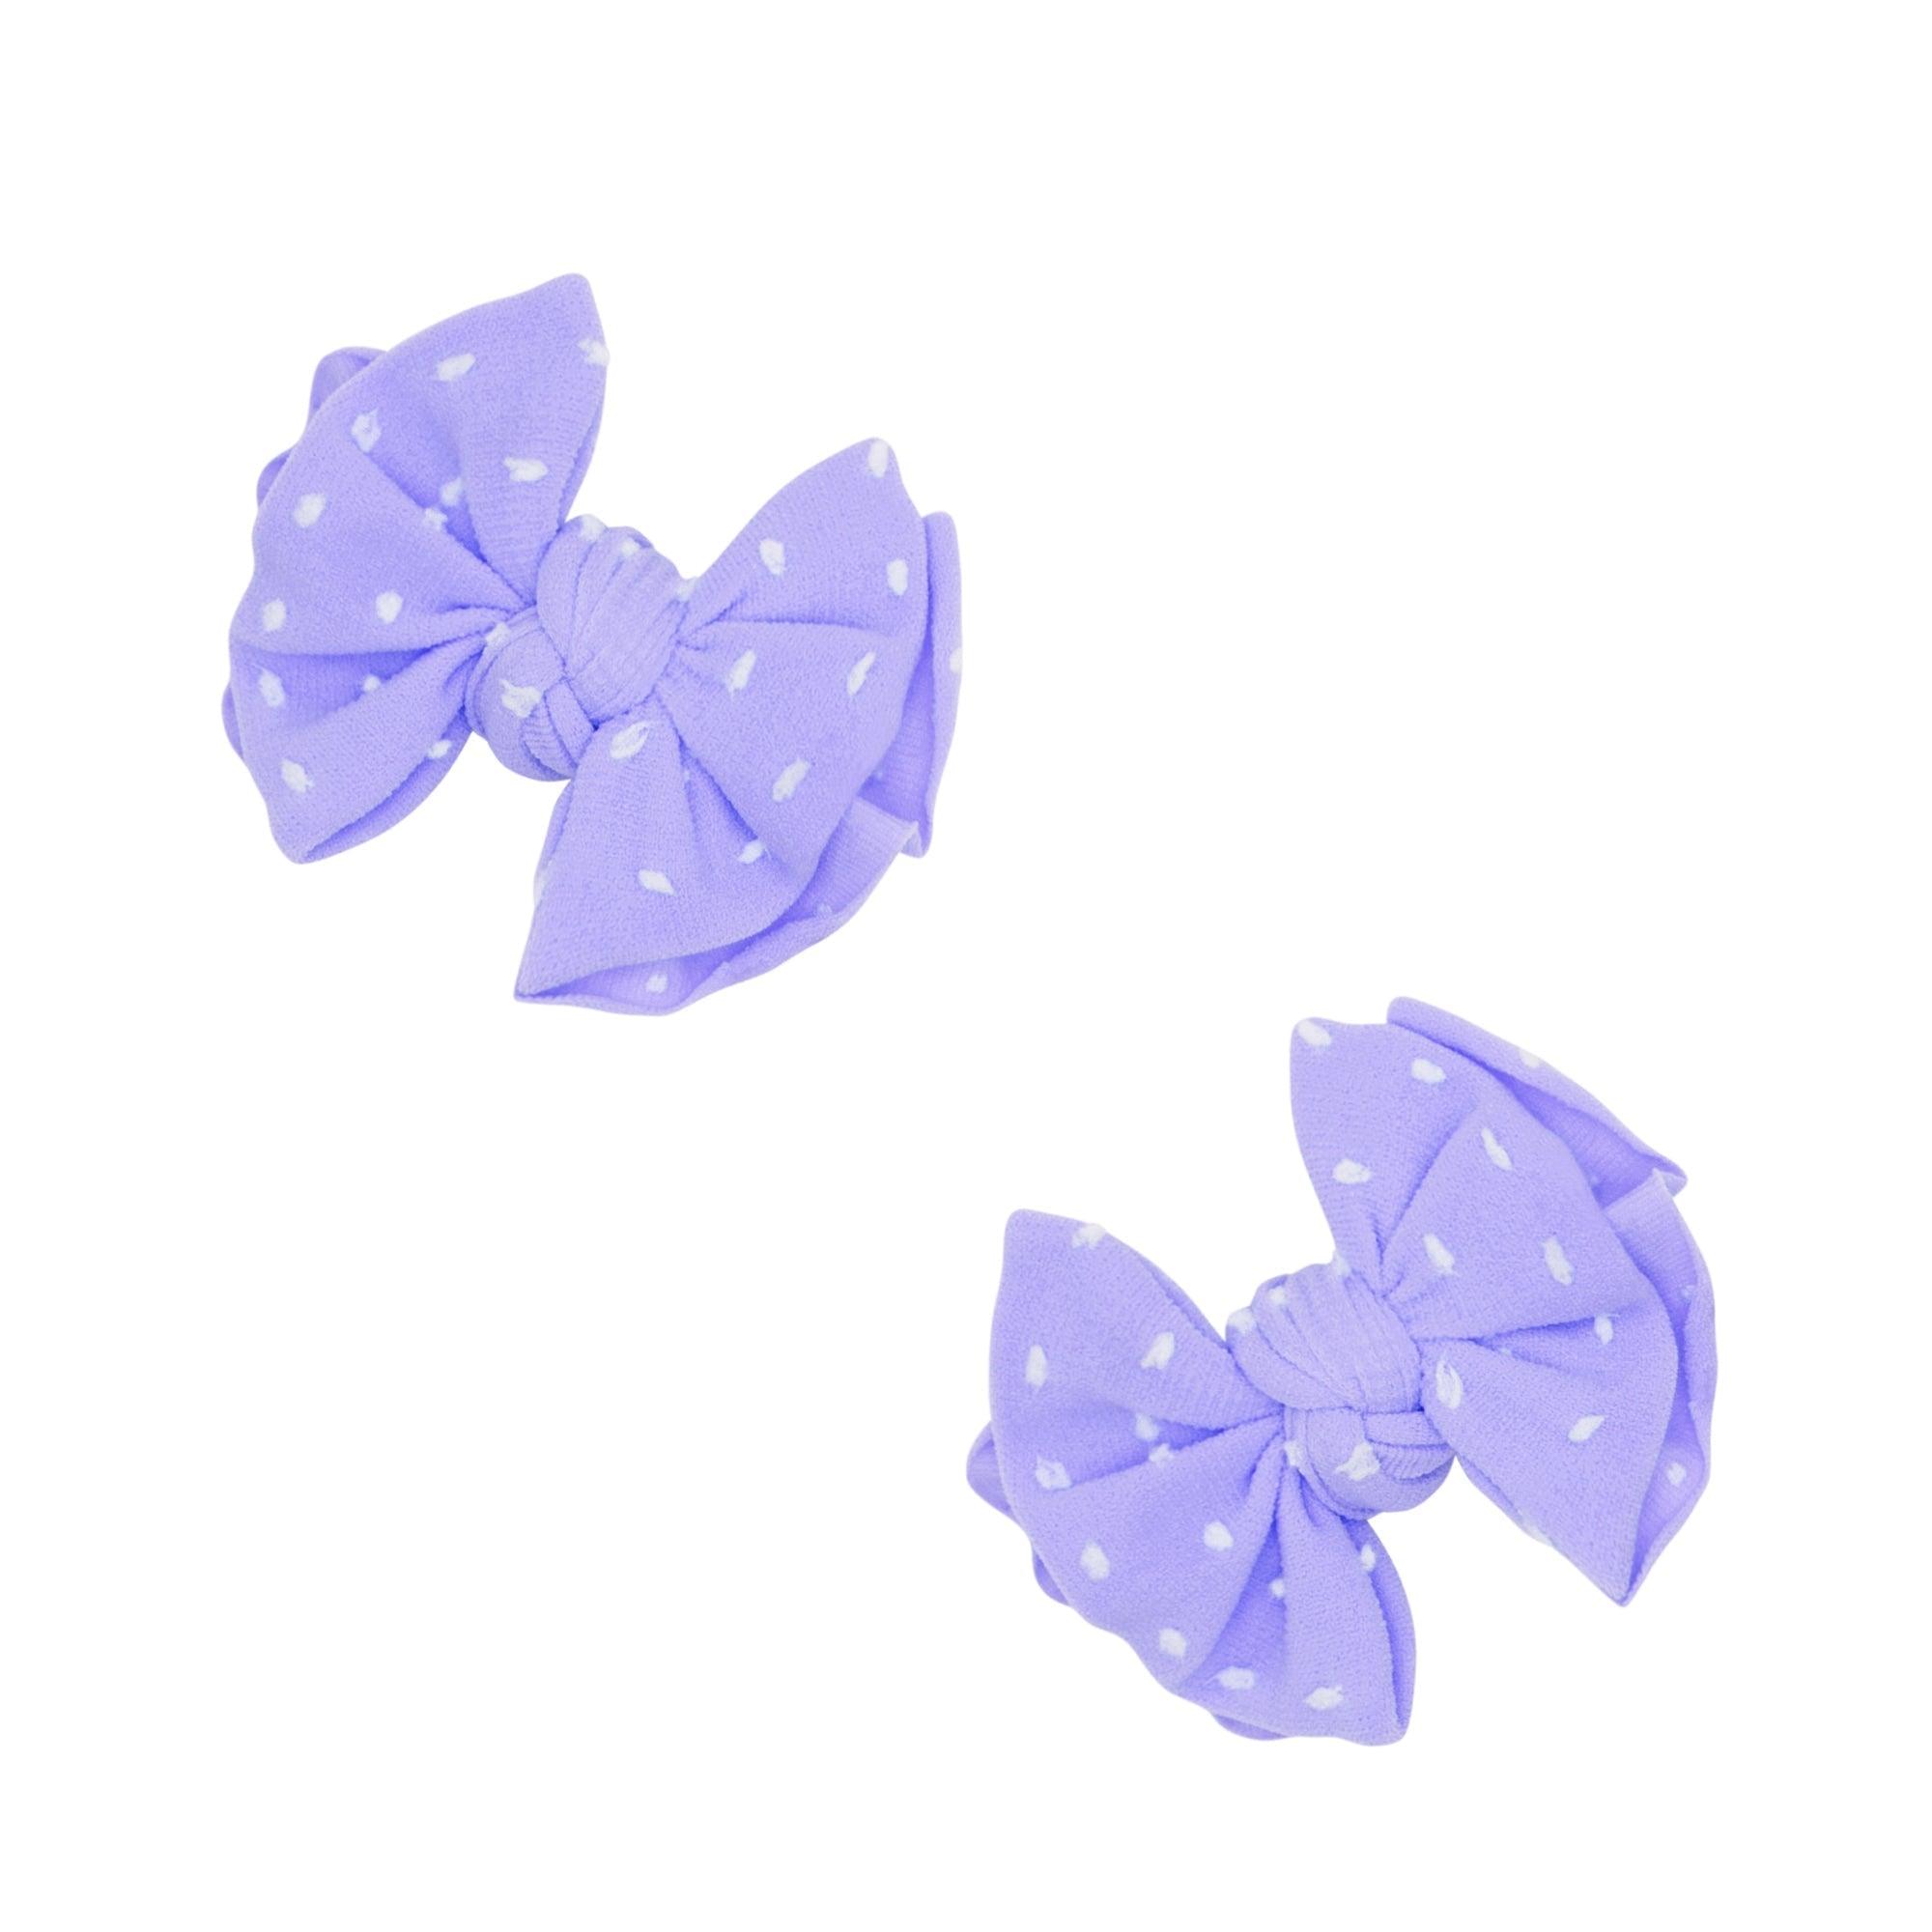 2PK BABY SHAB CLIPS: periwinkle dot